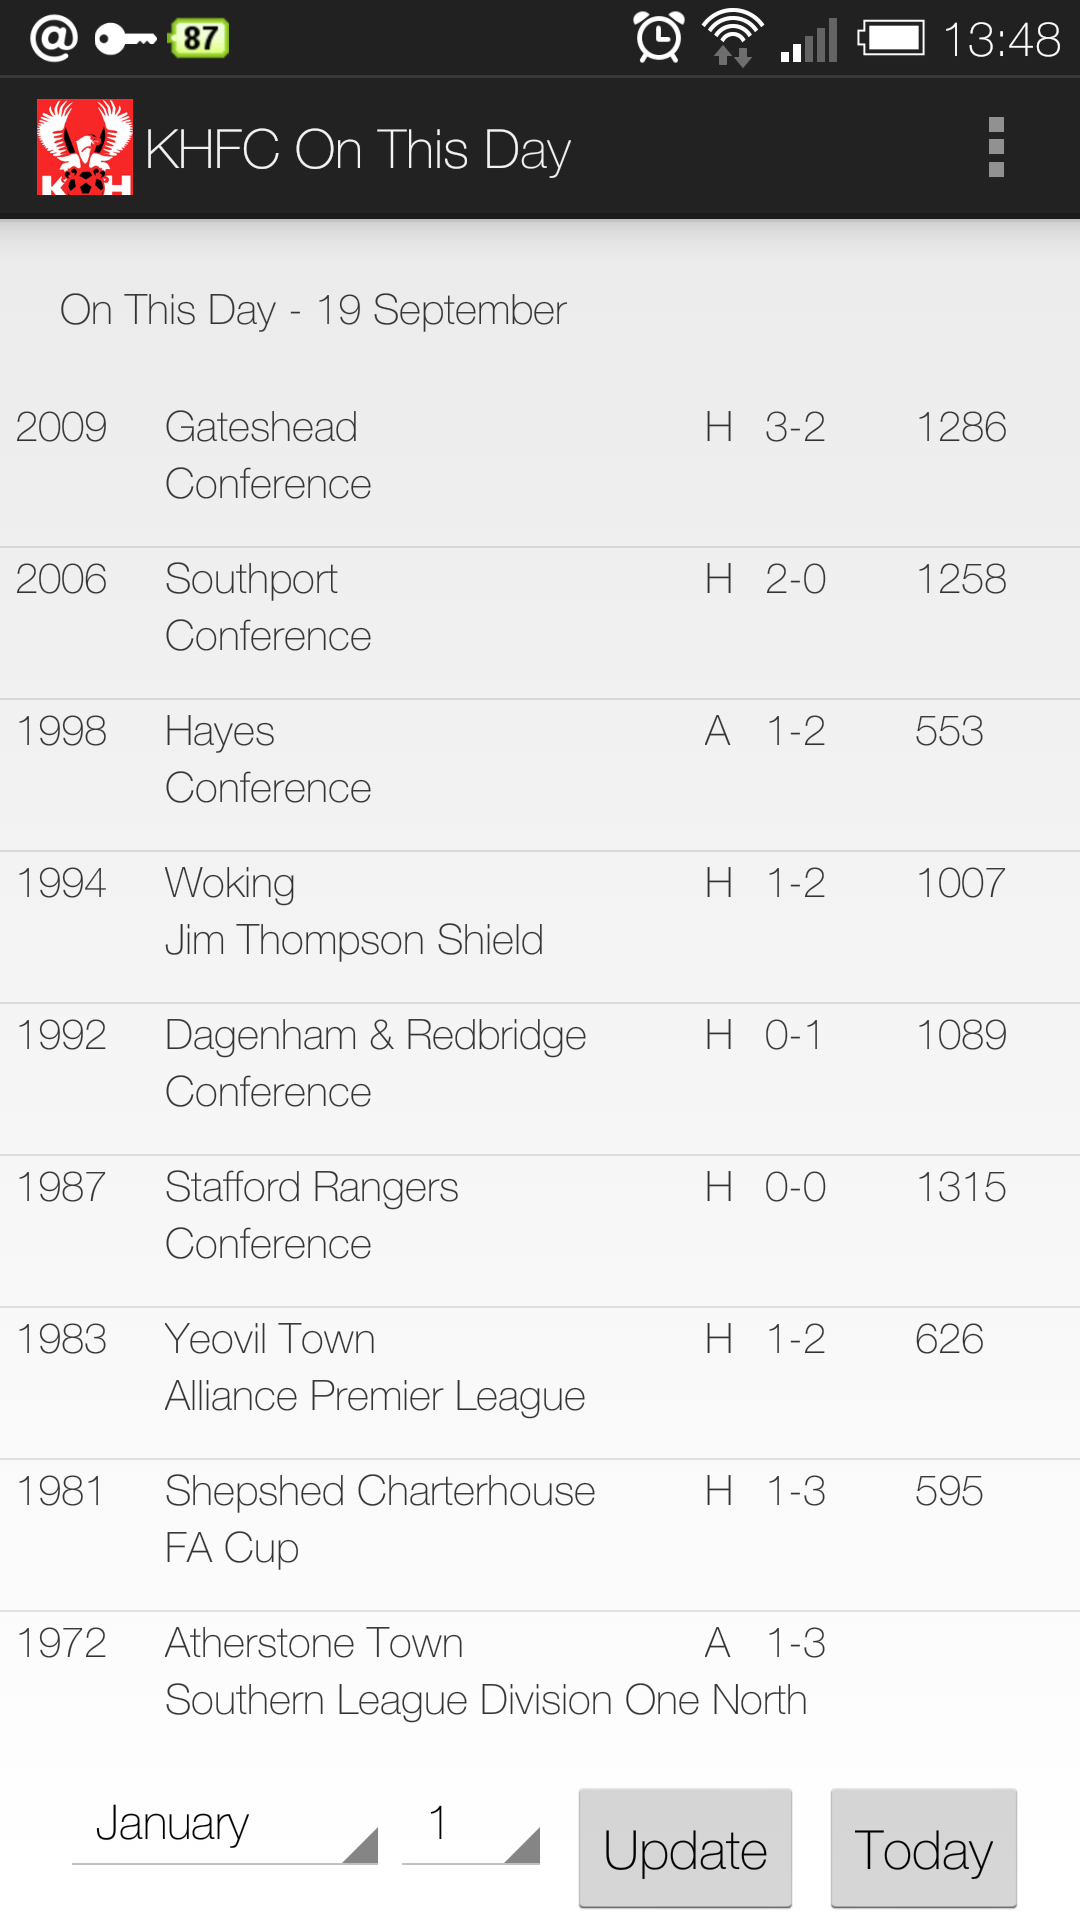 KHFC - On This Day app screenshot